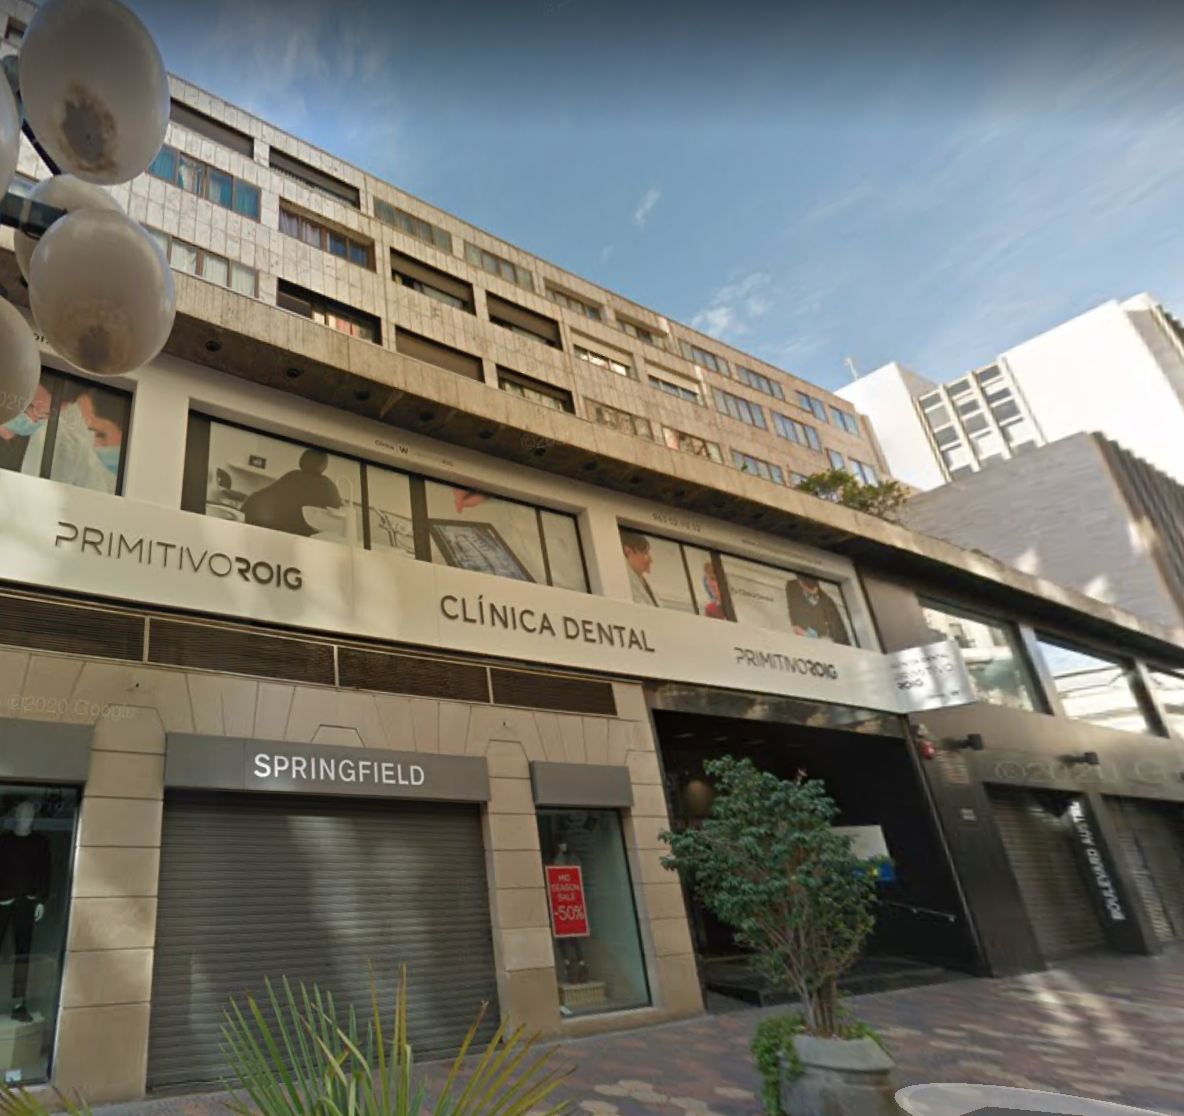 Inmofam 99 sells a premises in Valencia for €8.5M